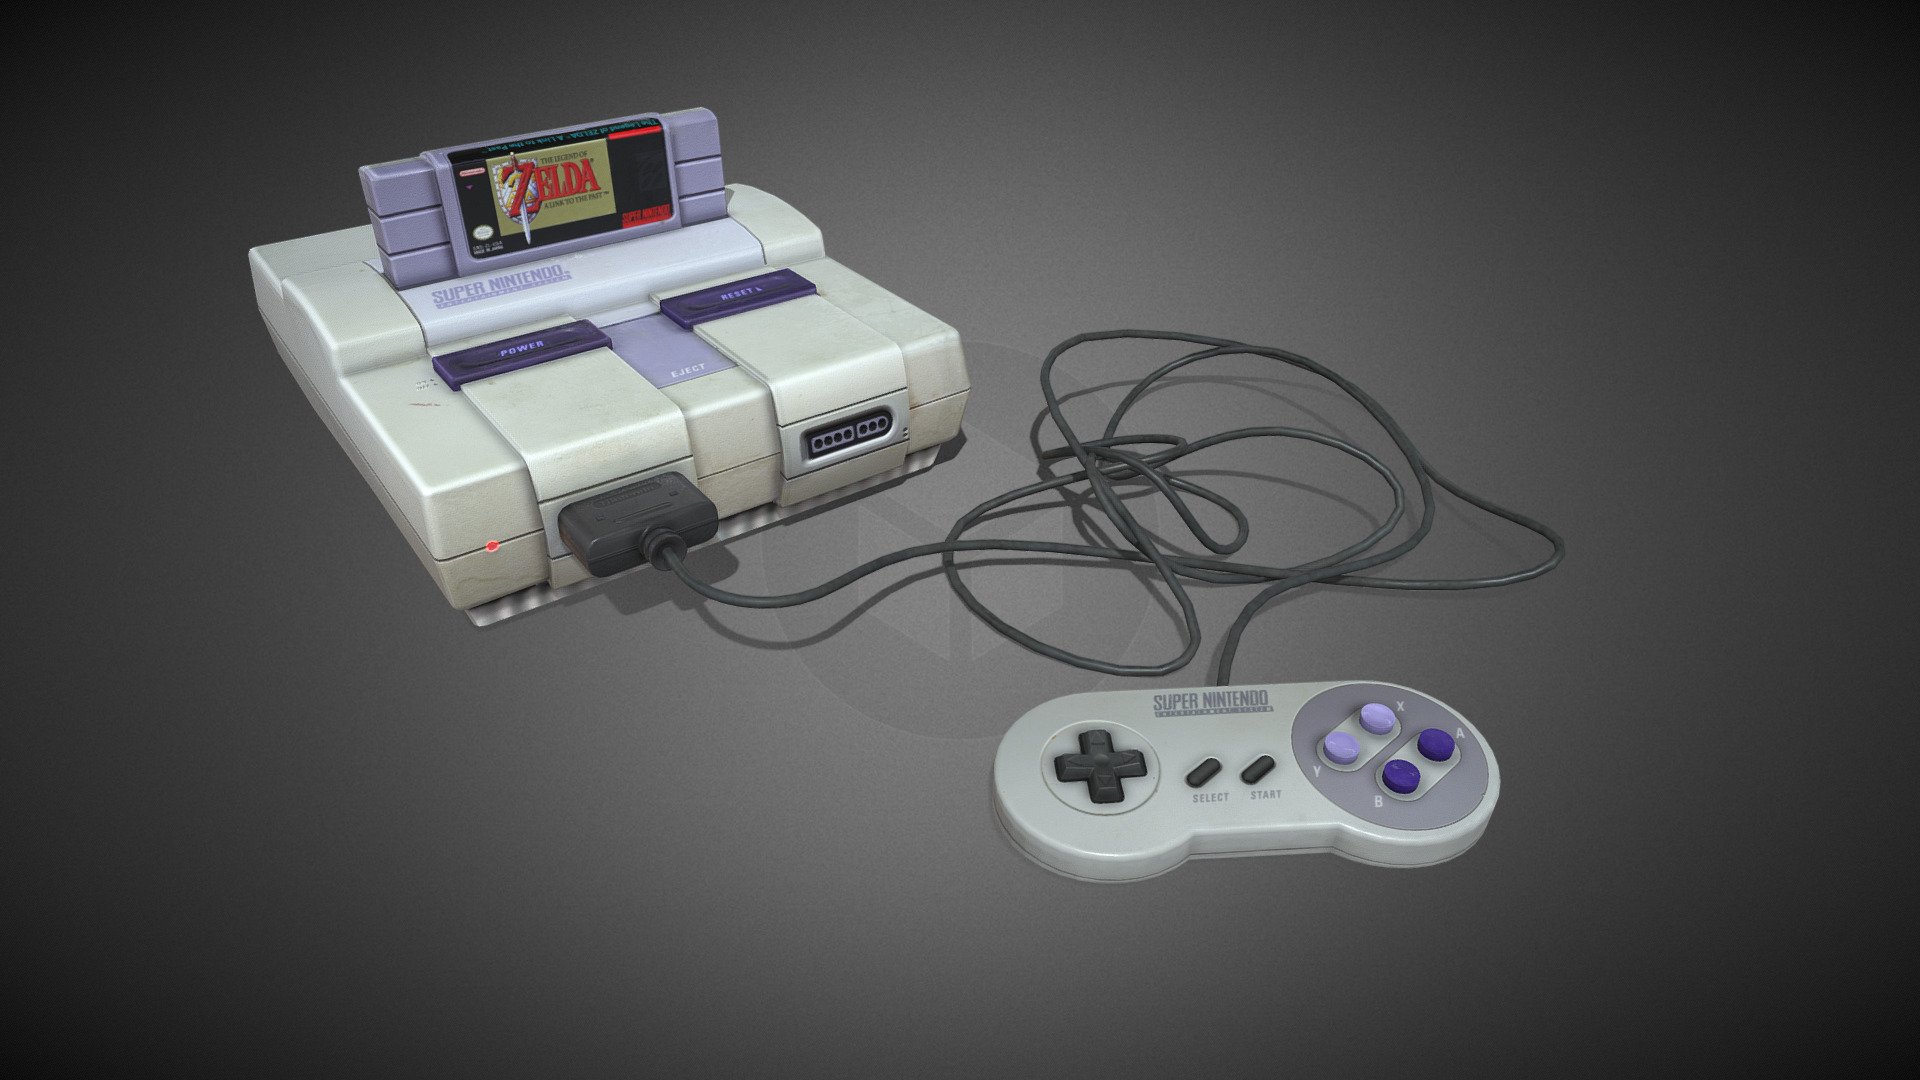 Original Super Nintendo console with controller.The game inserted in is Zelda: A Link to the Past, one of the best games ever made. It's one of the games I played as a kid that inspired me to go into game development. Created using photogrammetry to capture the shape and texture. Model cleaned up and made game ready in Maya and material fixed in Substance Painter &amp; Photoshop - Super Nintendo w/ Zelda Cartridge - 3D model by Polygarden 3d model